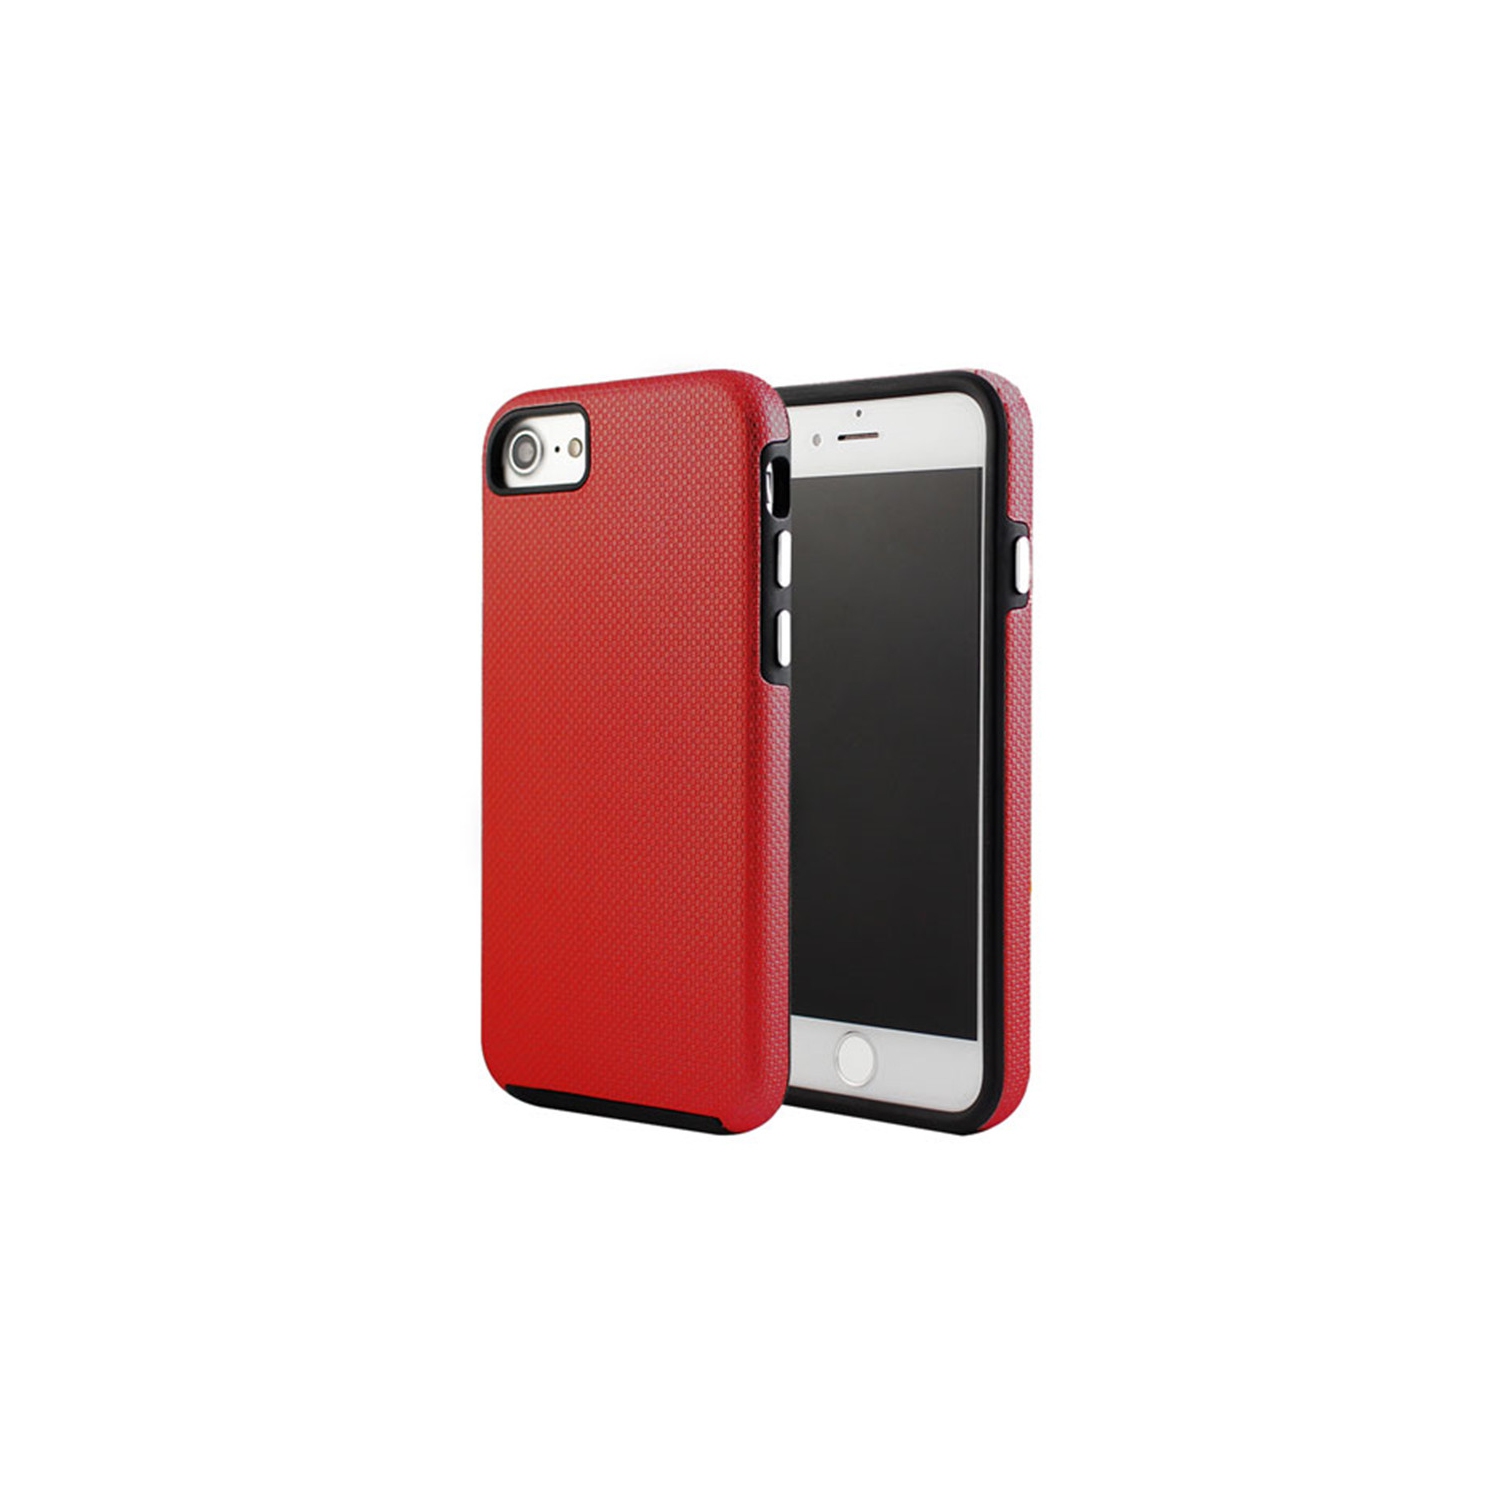 【CSmart】 Slim Fitted Hybrid Hard PC Shell Shockproof Scratch Resistant Case Cover for iPhone 5 / 5S / SE, Red